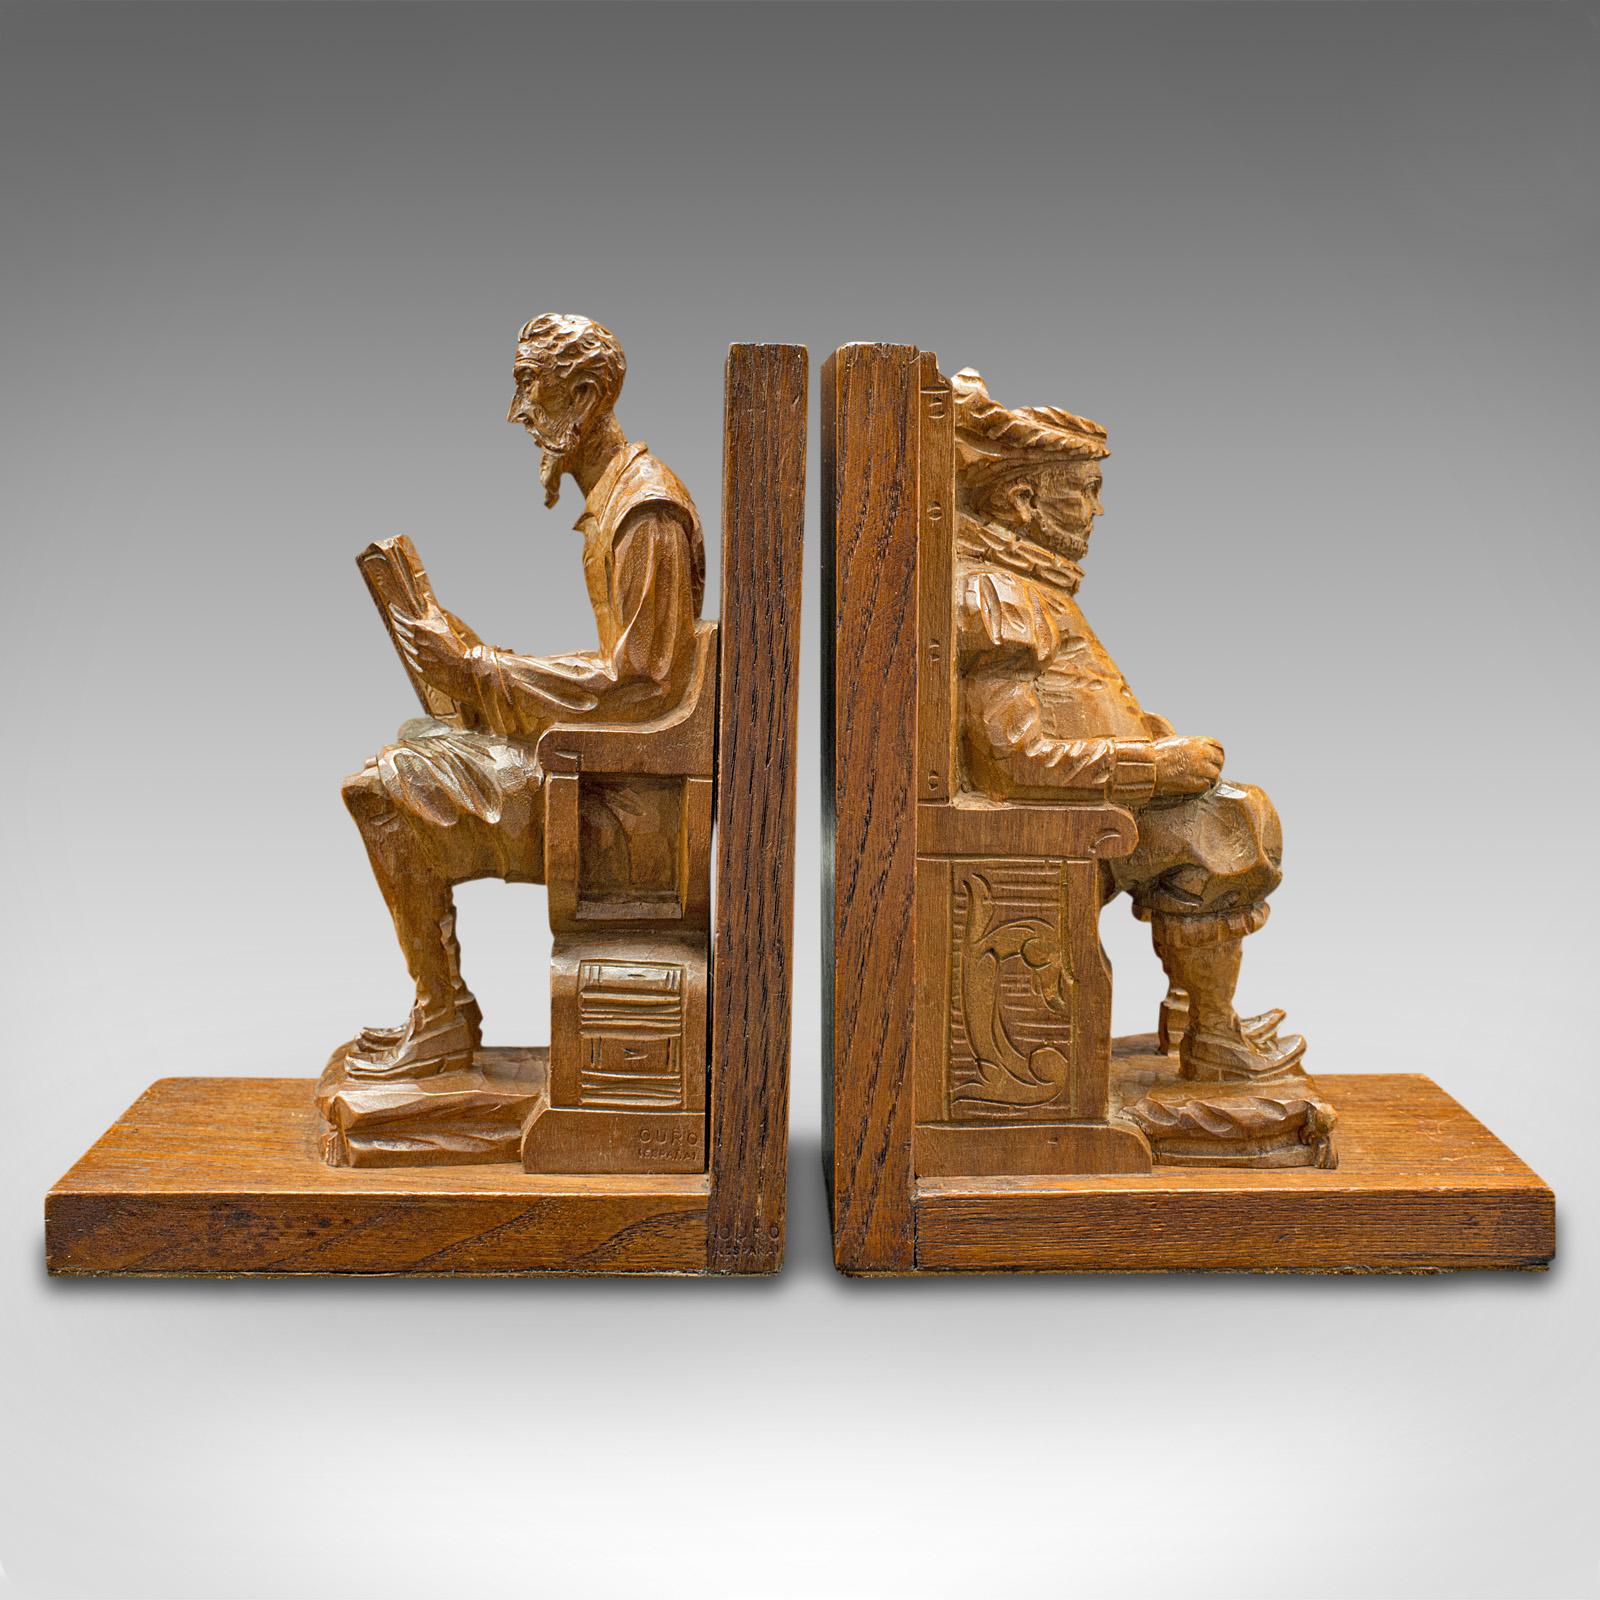 This is a pair of vintage character bookends. A Spanish, hand-carved oak figurative book rest of Don Quixote and Sancho Panza, dating to the mid 20th century, circa 1960.

Fascinating hand-carved bookends of the literary icons
Displays a desirable